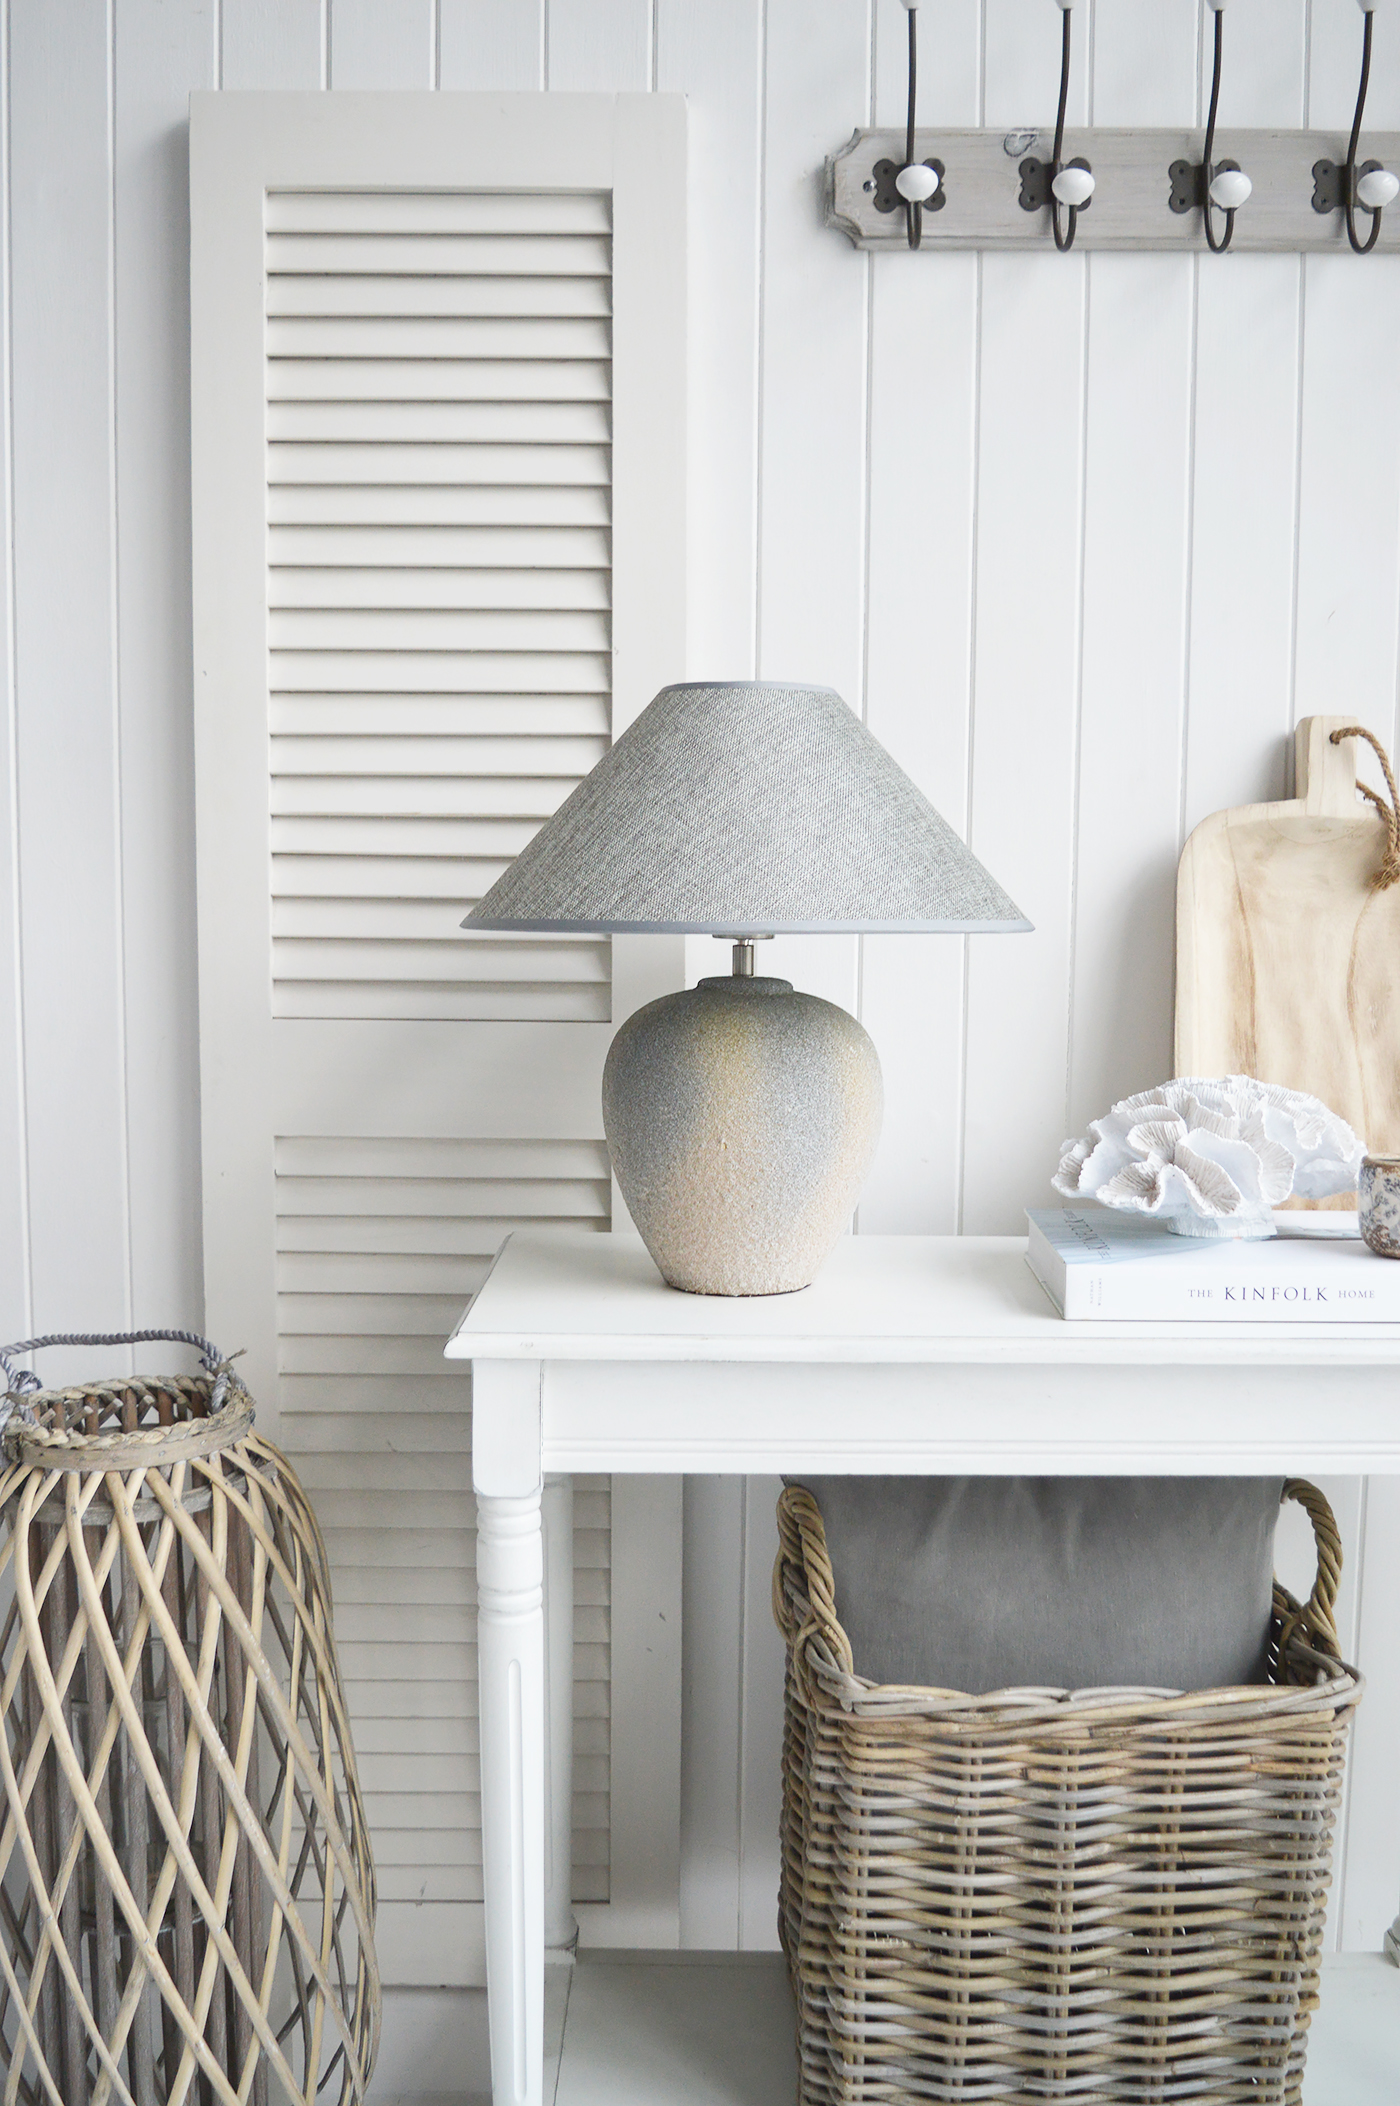 Southport grey stone lamp  from The White Lighthouse Furniture. A lovely table lamp for bedside table or living room or bedroom furniture. New England style table lamps and lighting